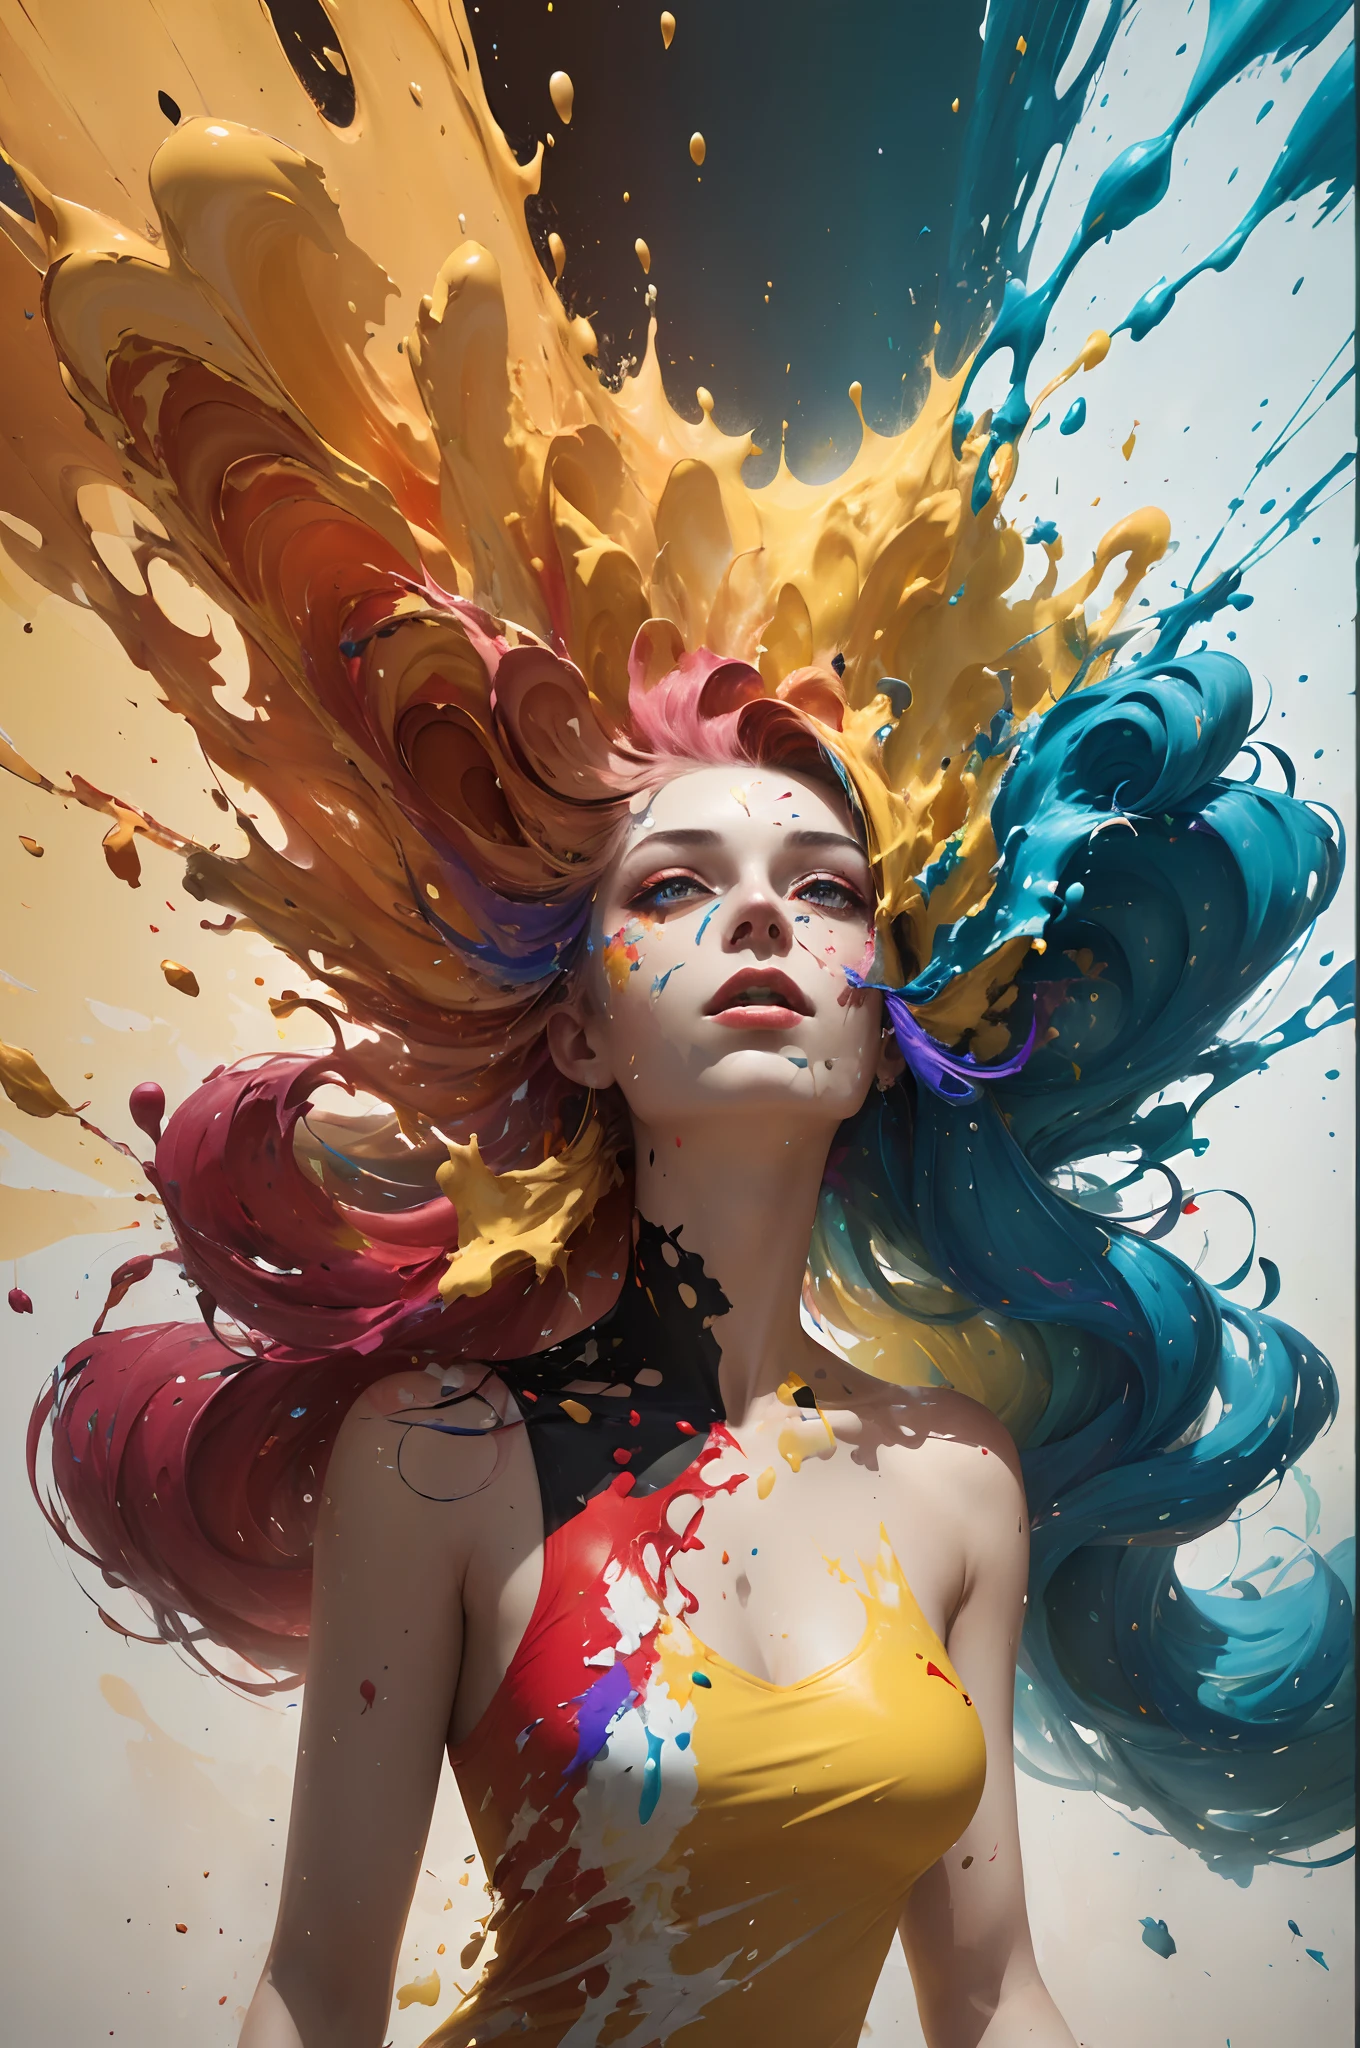 (level difference:1.8),(The paint collides and splashes onto the canvas),(depth of fields),(Flat color:1.1,(Yellow theme)),1 girl,Propaganda poster,full bodyesbian,strong winds,dense smoke,,(Liquid dyes for rainbow hair:1.1) Made of paint，anti gravity,Thick liquid,(paint splatter:1.3),liquidity,stunningly beautiful, Masterpiece, Detailed background,ultra high quality model, Ethereal background,Abstract beauty, explosive volumetric, Oil painting,Heavy strokes,romantic lighting,Sub-surface scattering,Glow,8K,high resolution, Dreamy,Ray tracing,hdr,god light,